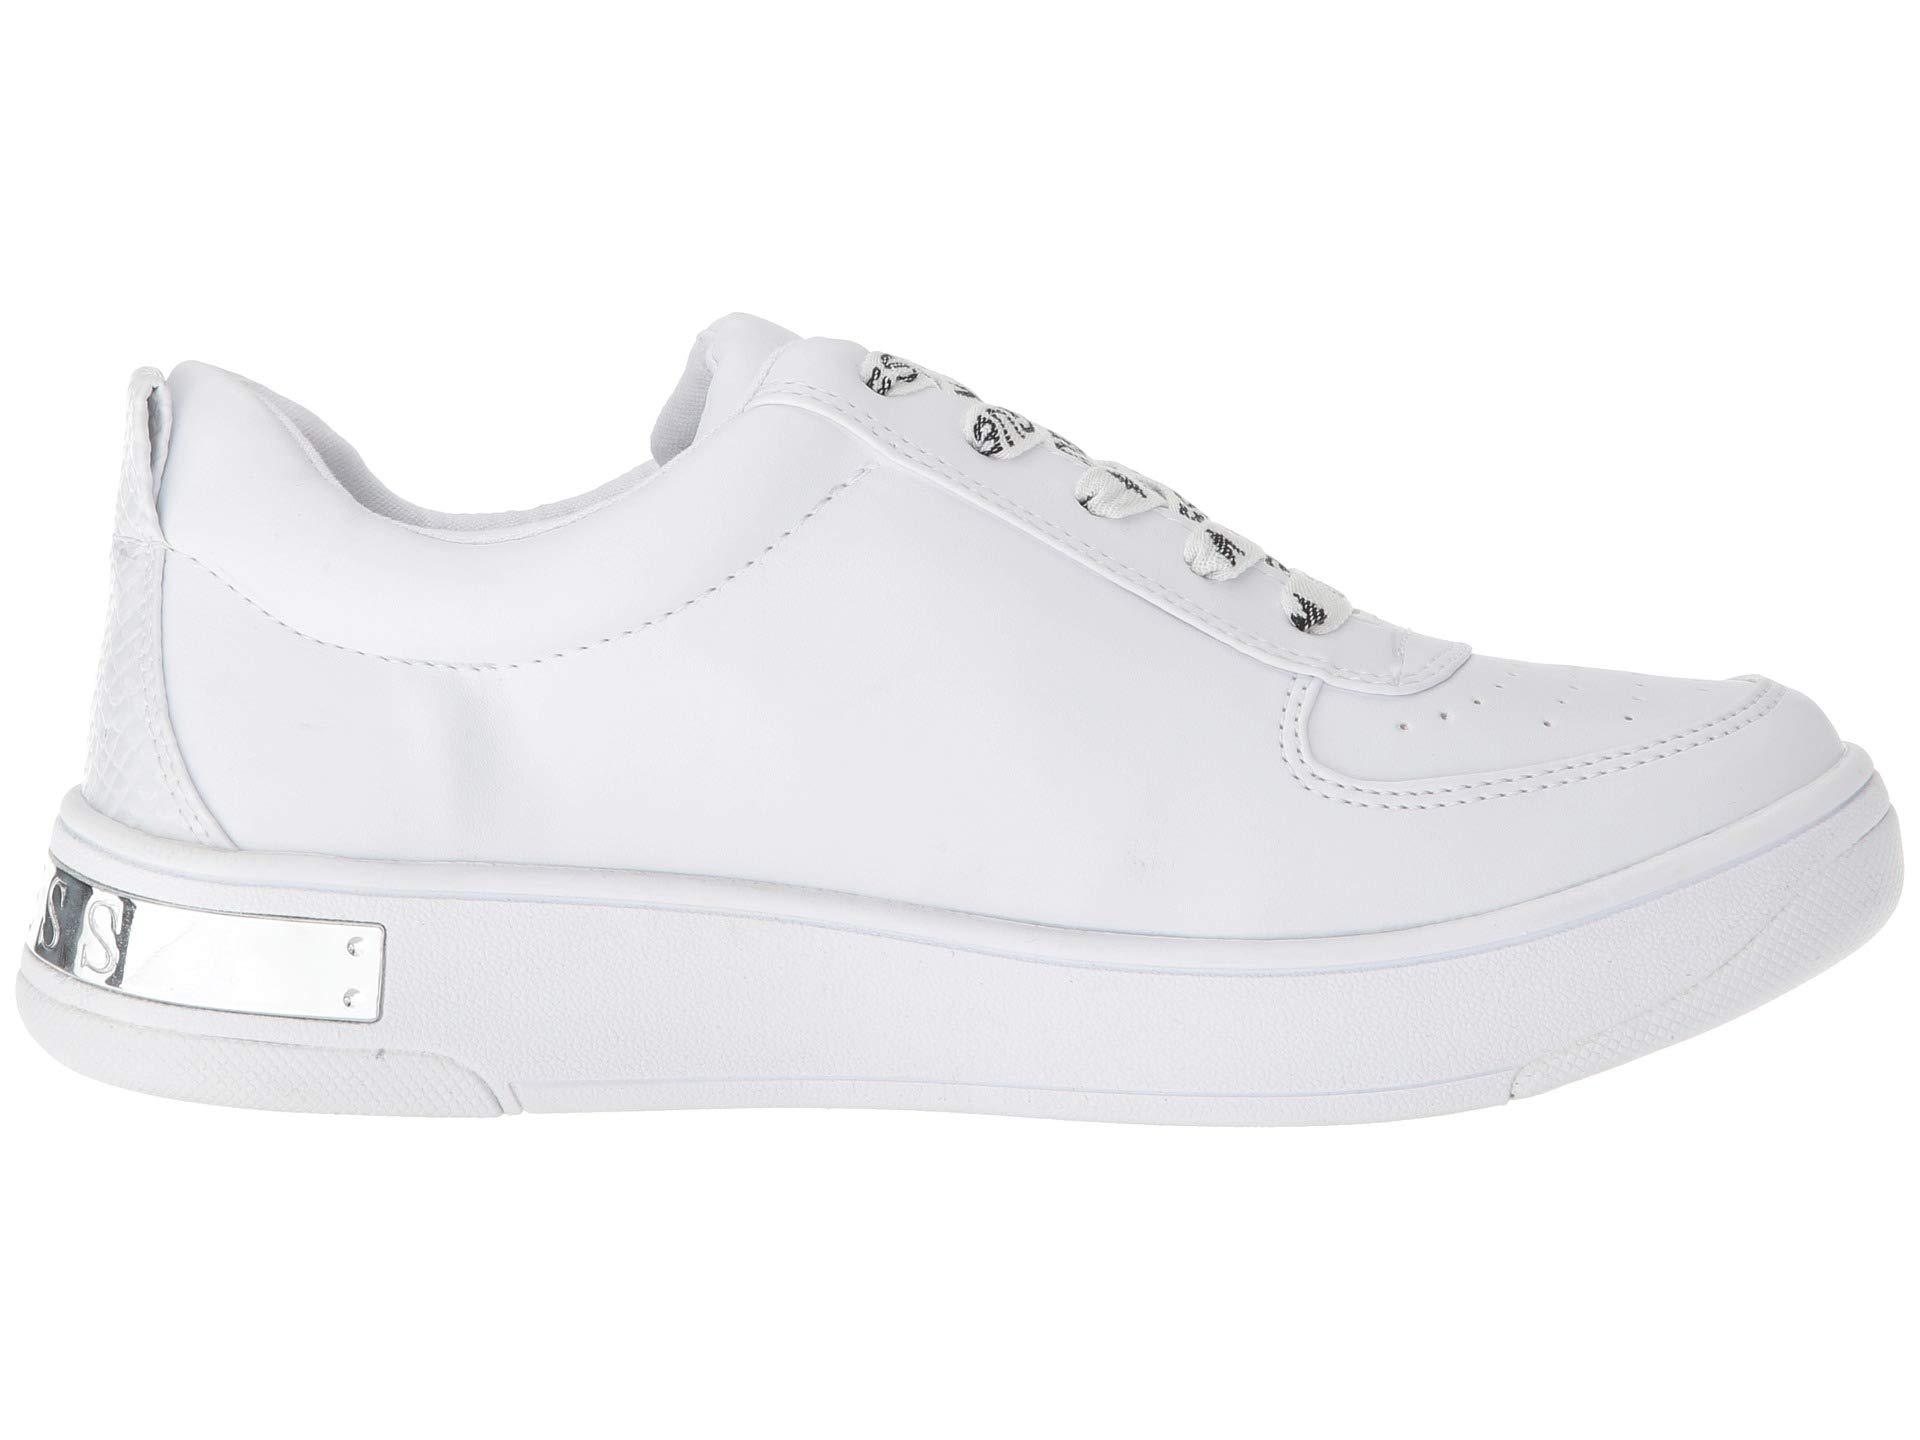 Guess Womens Hype Low Top Lace Up Fashion Sneakers, White, Size 10.0 ...